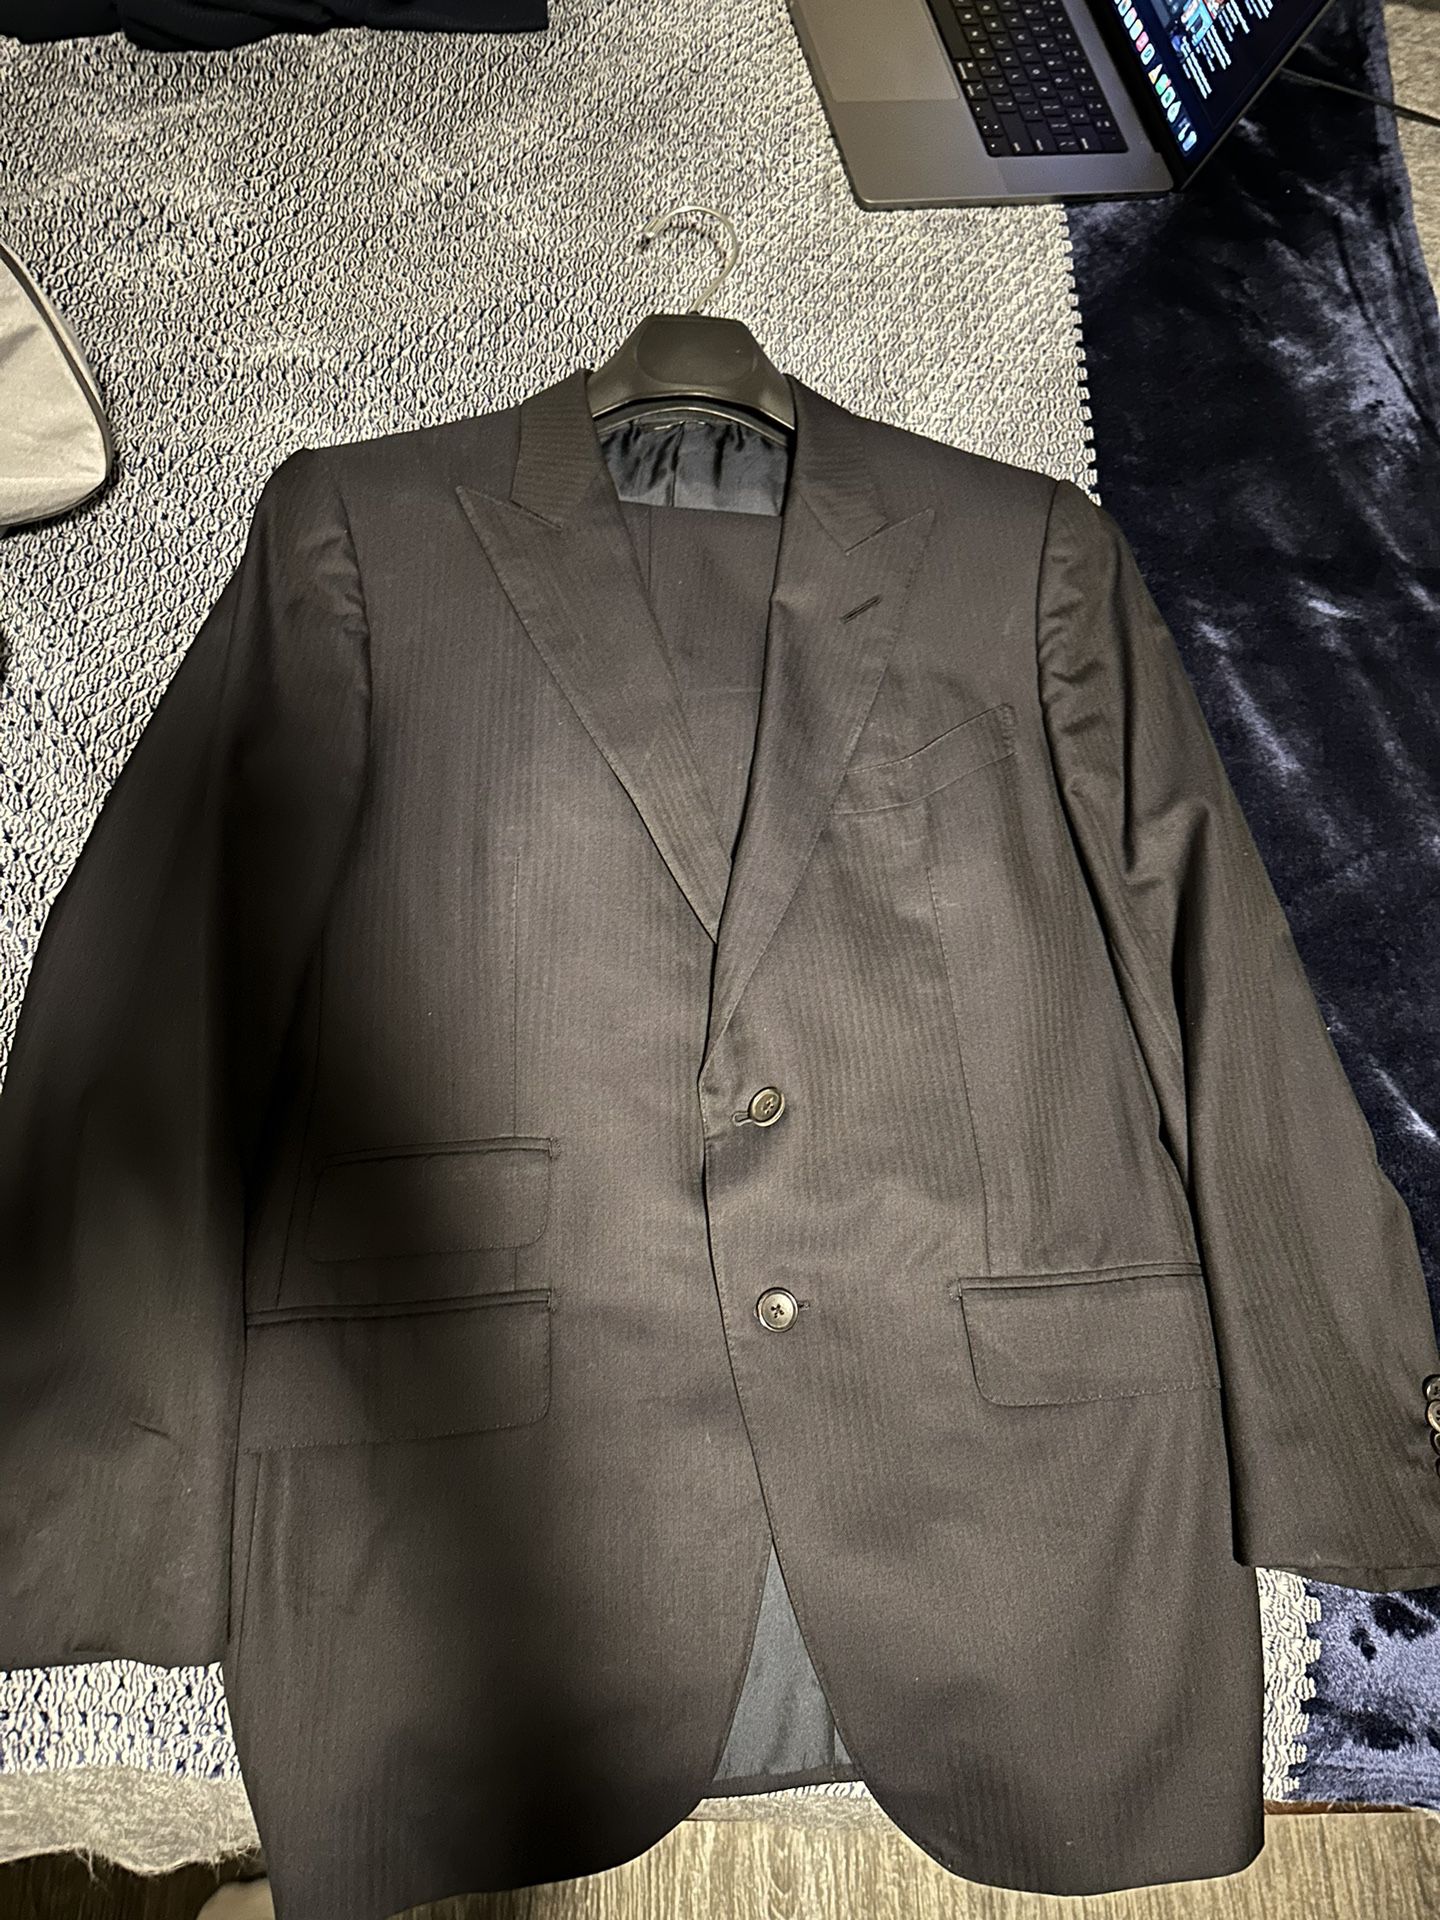 James Bond Tom Ford O’Connor Suit with Garment Bag